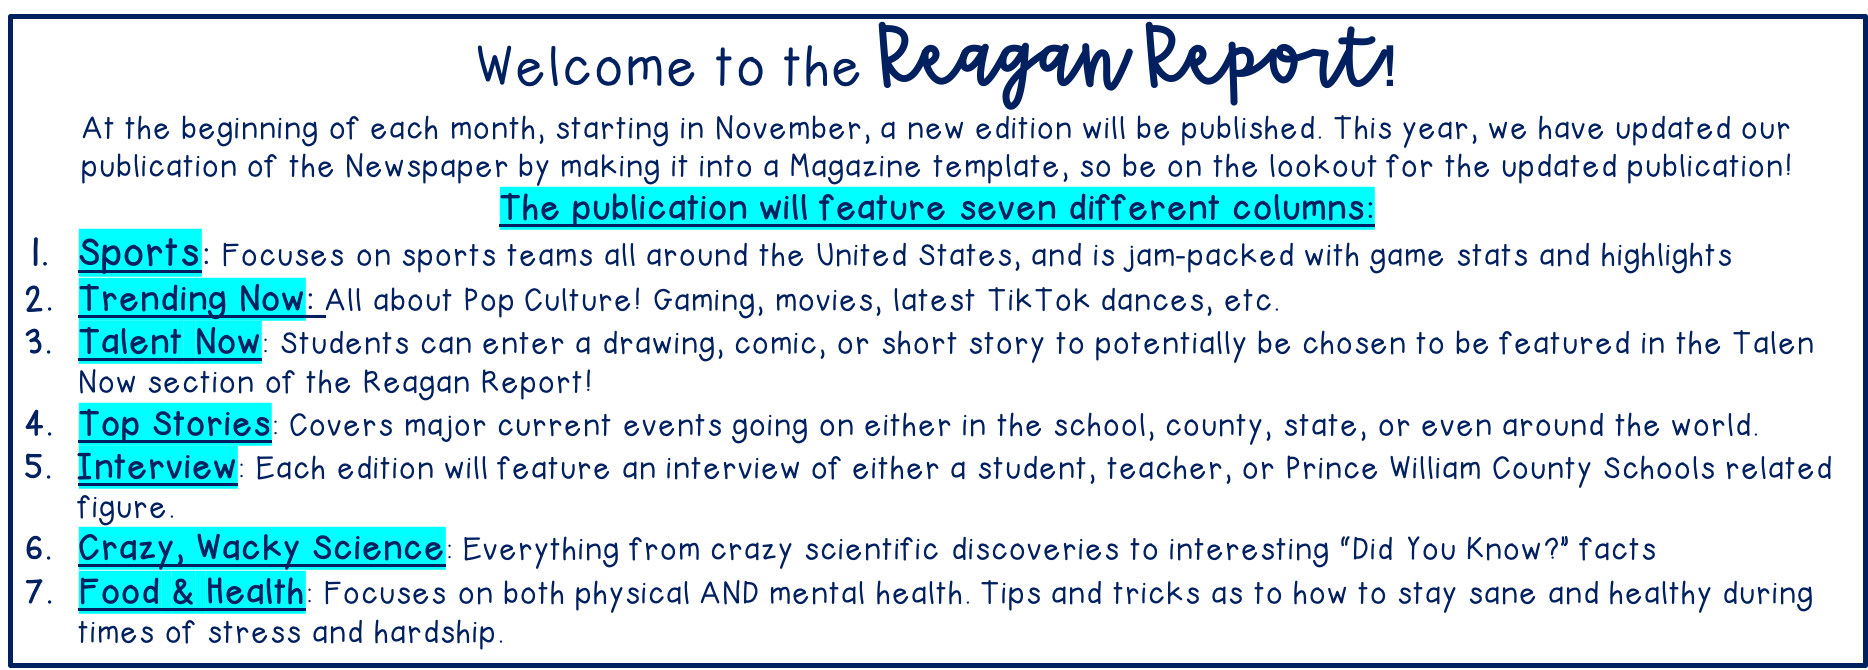 Welcome to the Reagan Report!